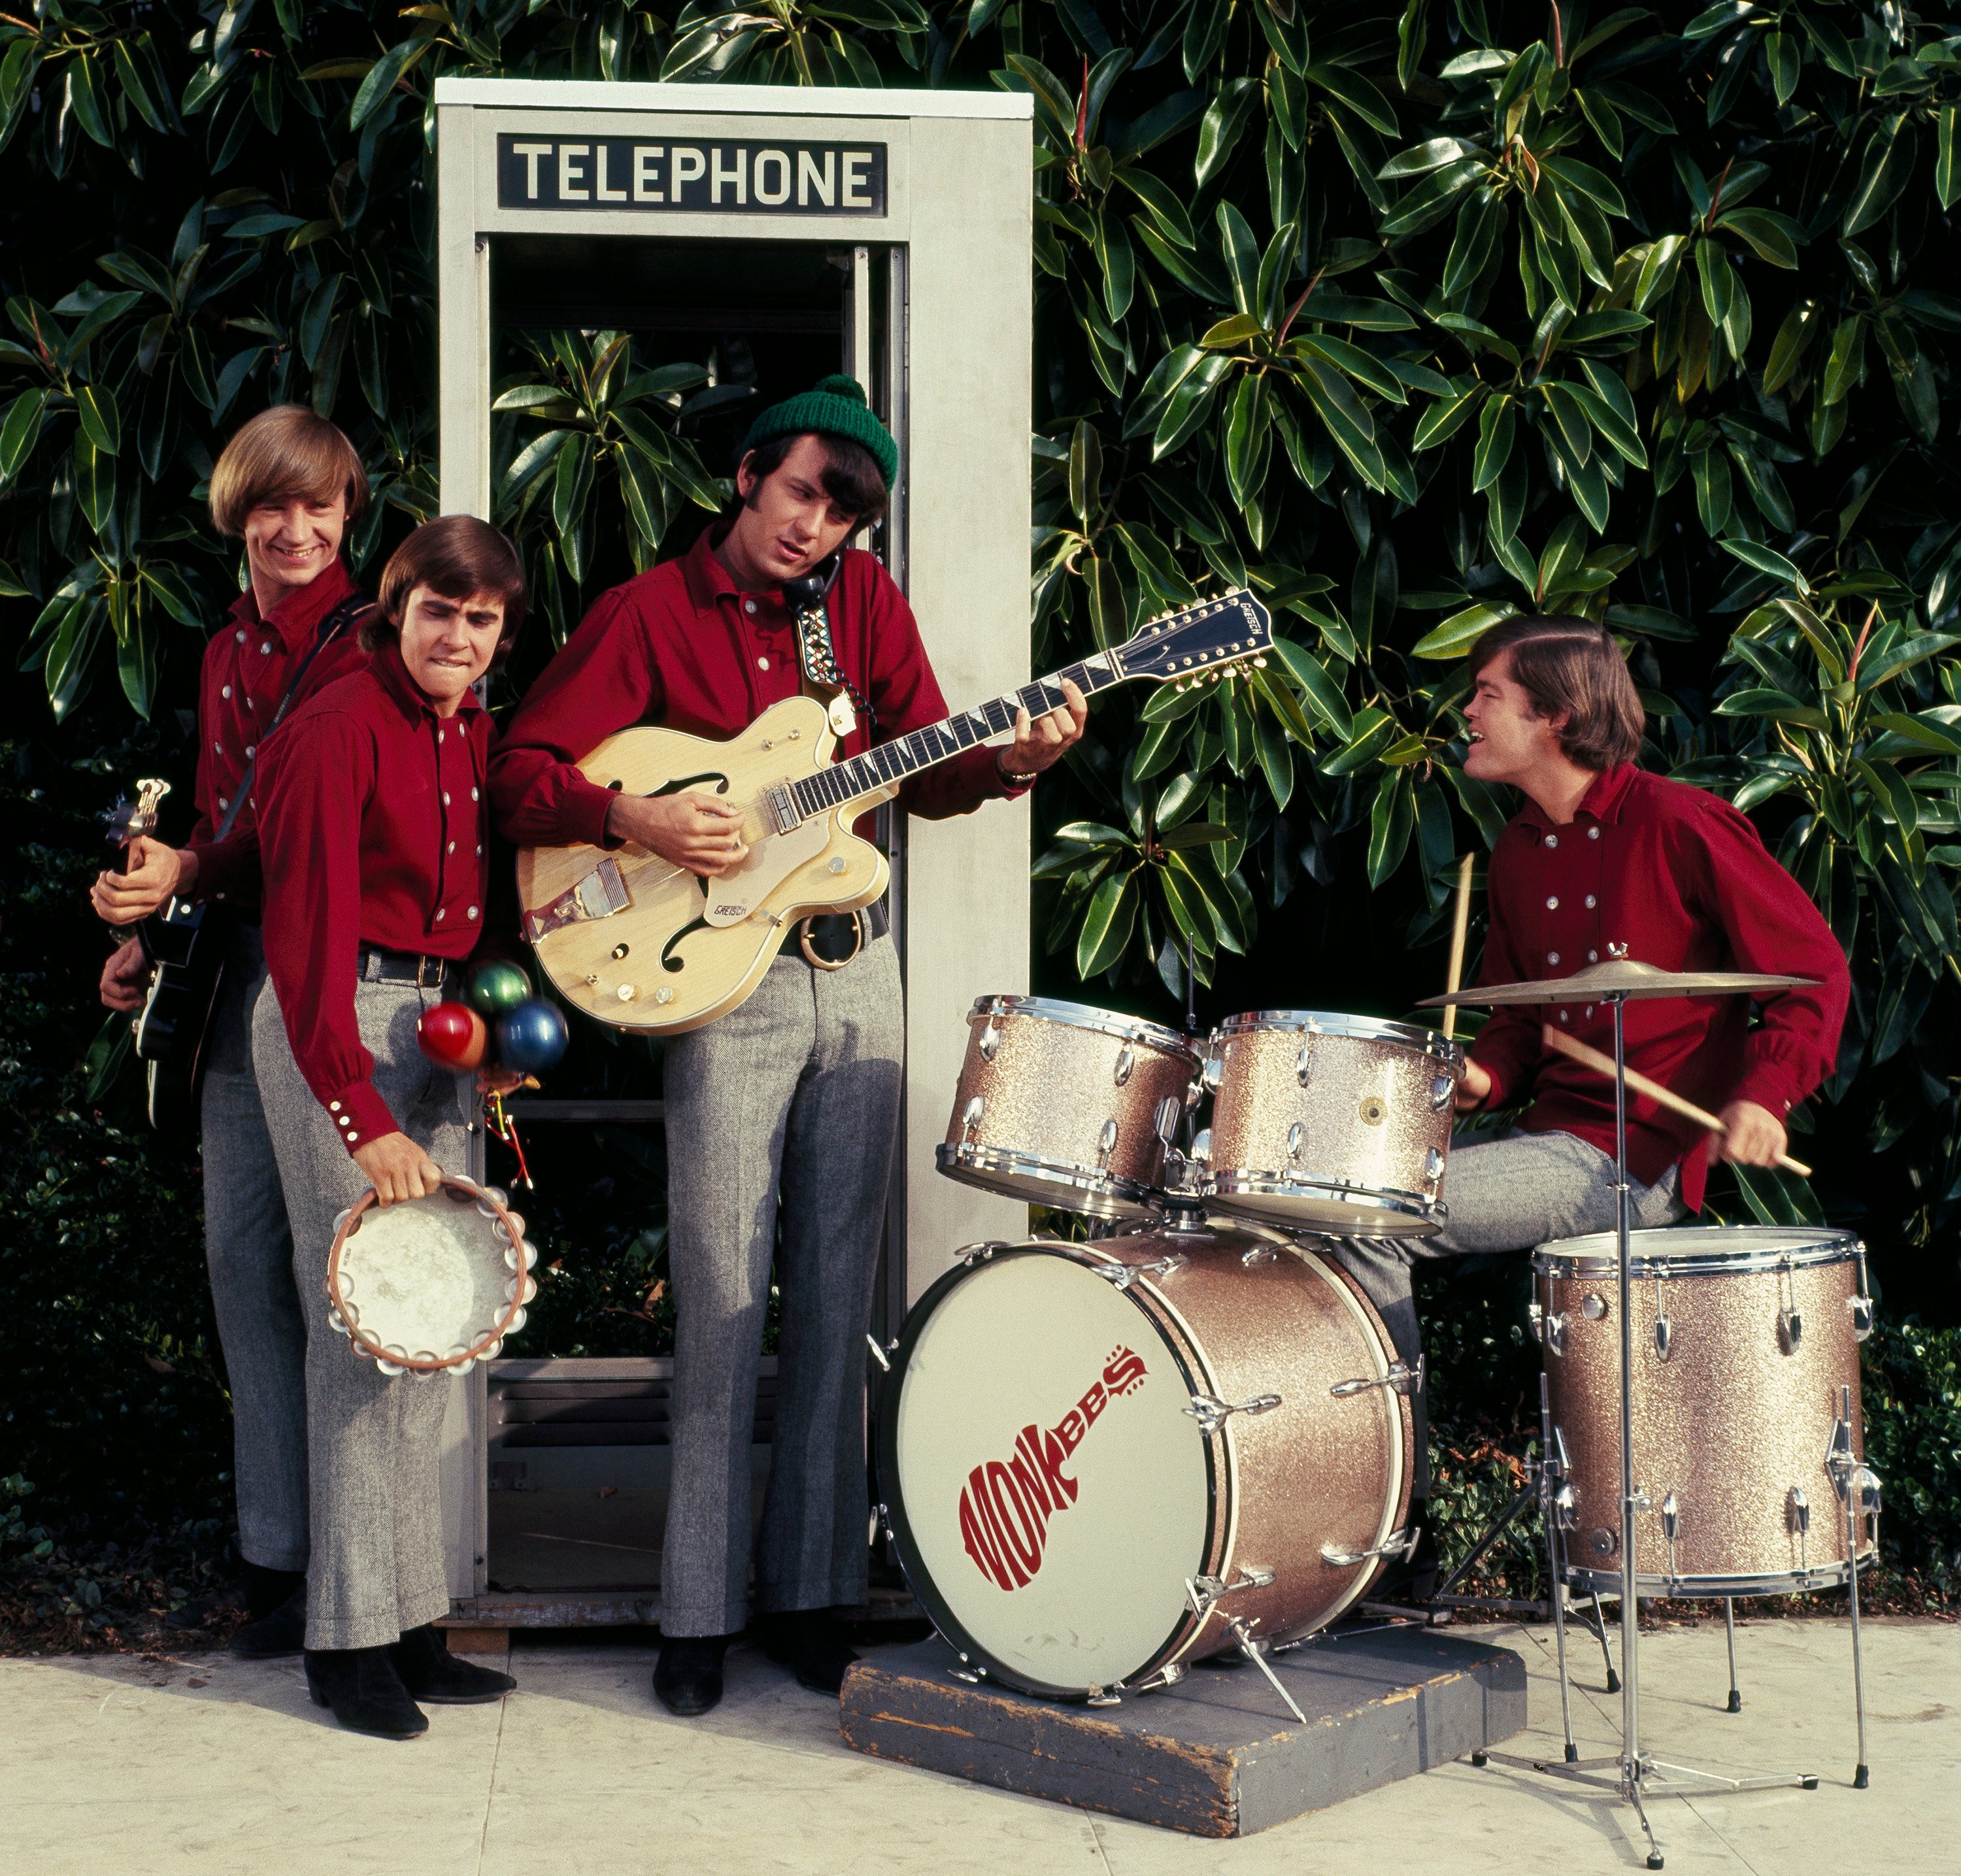 The Monkees’ Peter Tork, Davy Jones, Mike Nesmith, and Micky Dolenz near plants